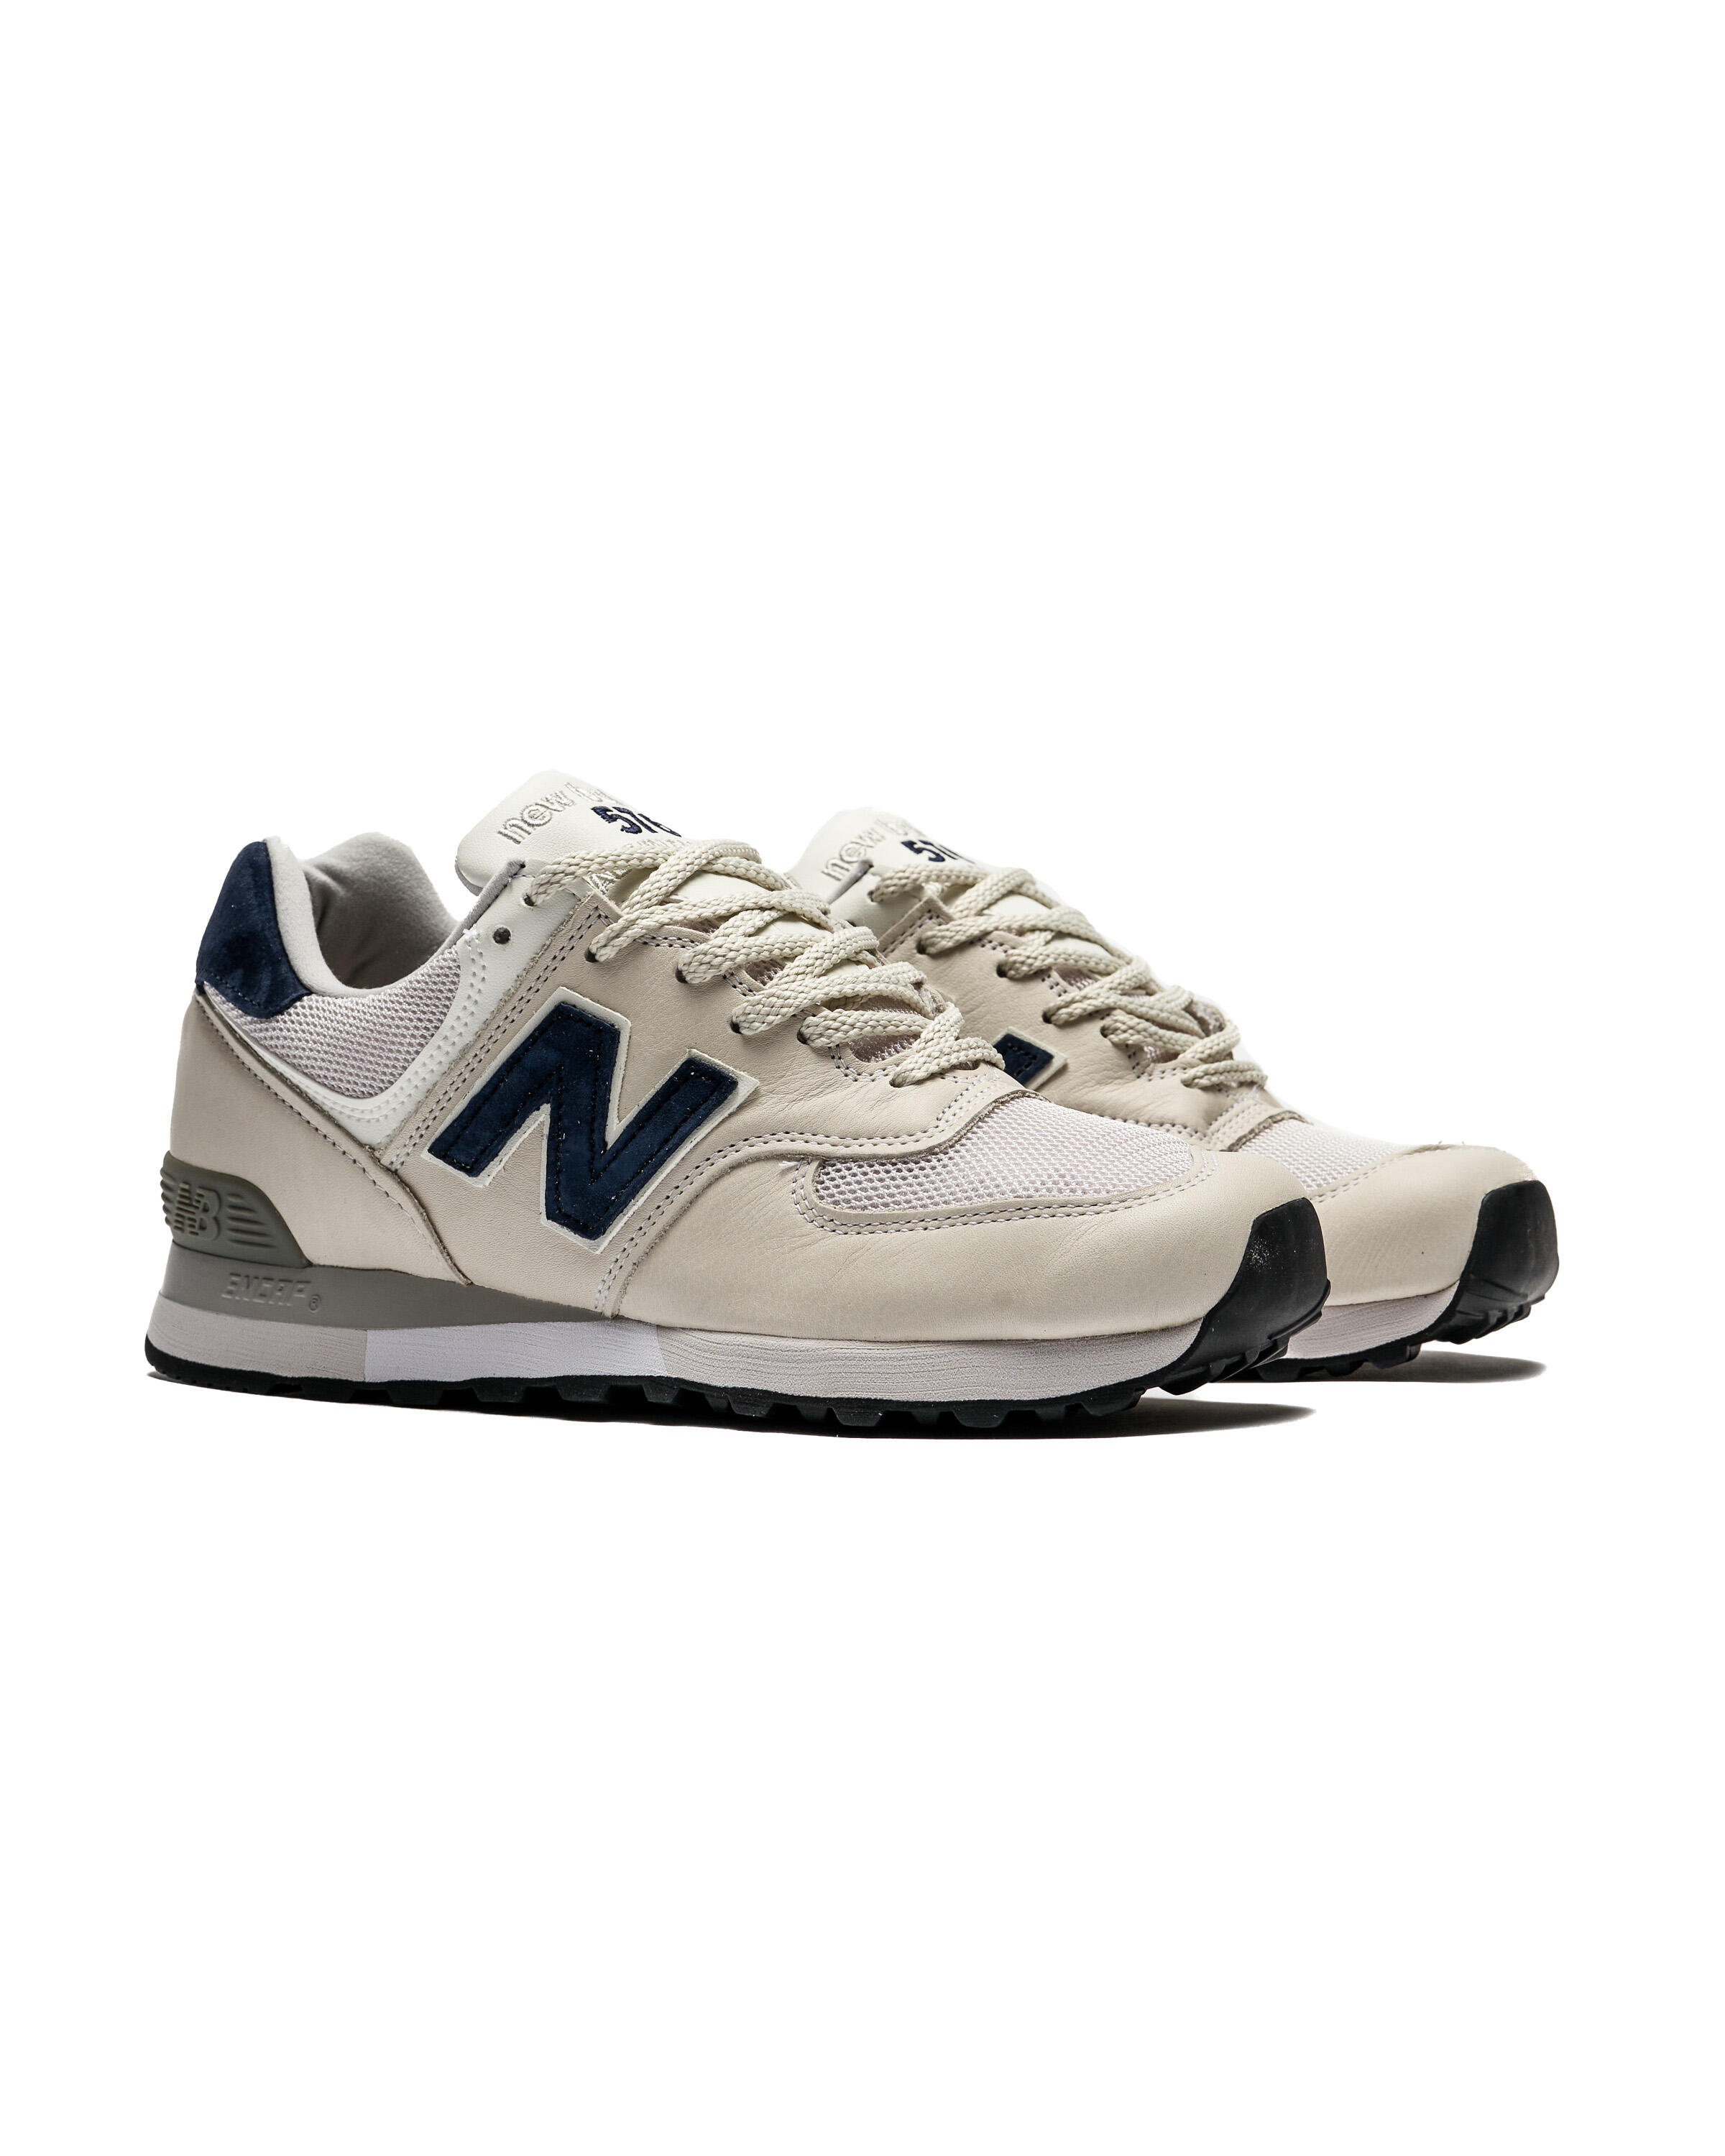 New Balance OU 576 LWG - Made in England